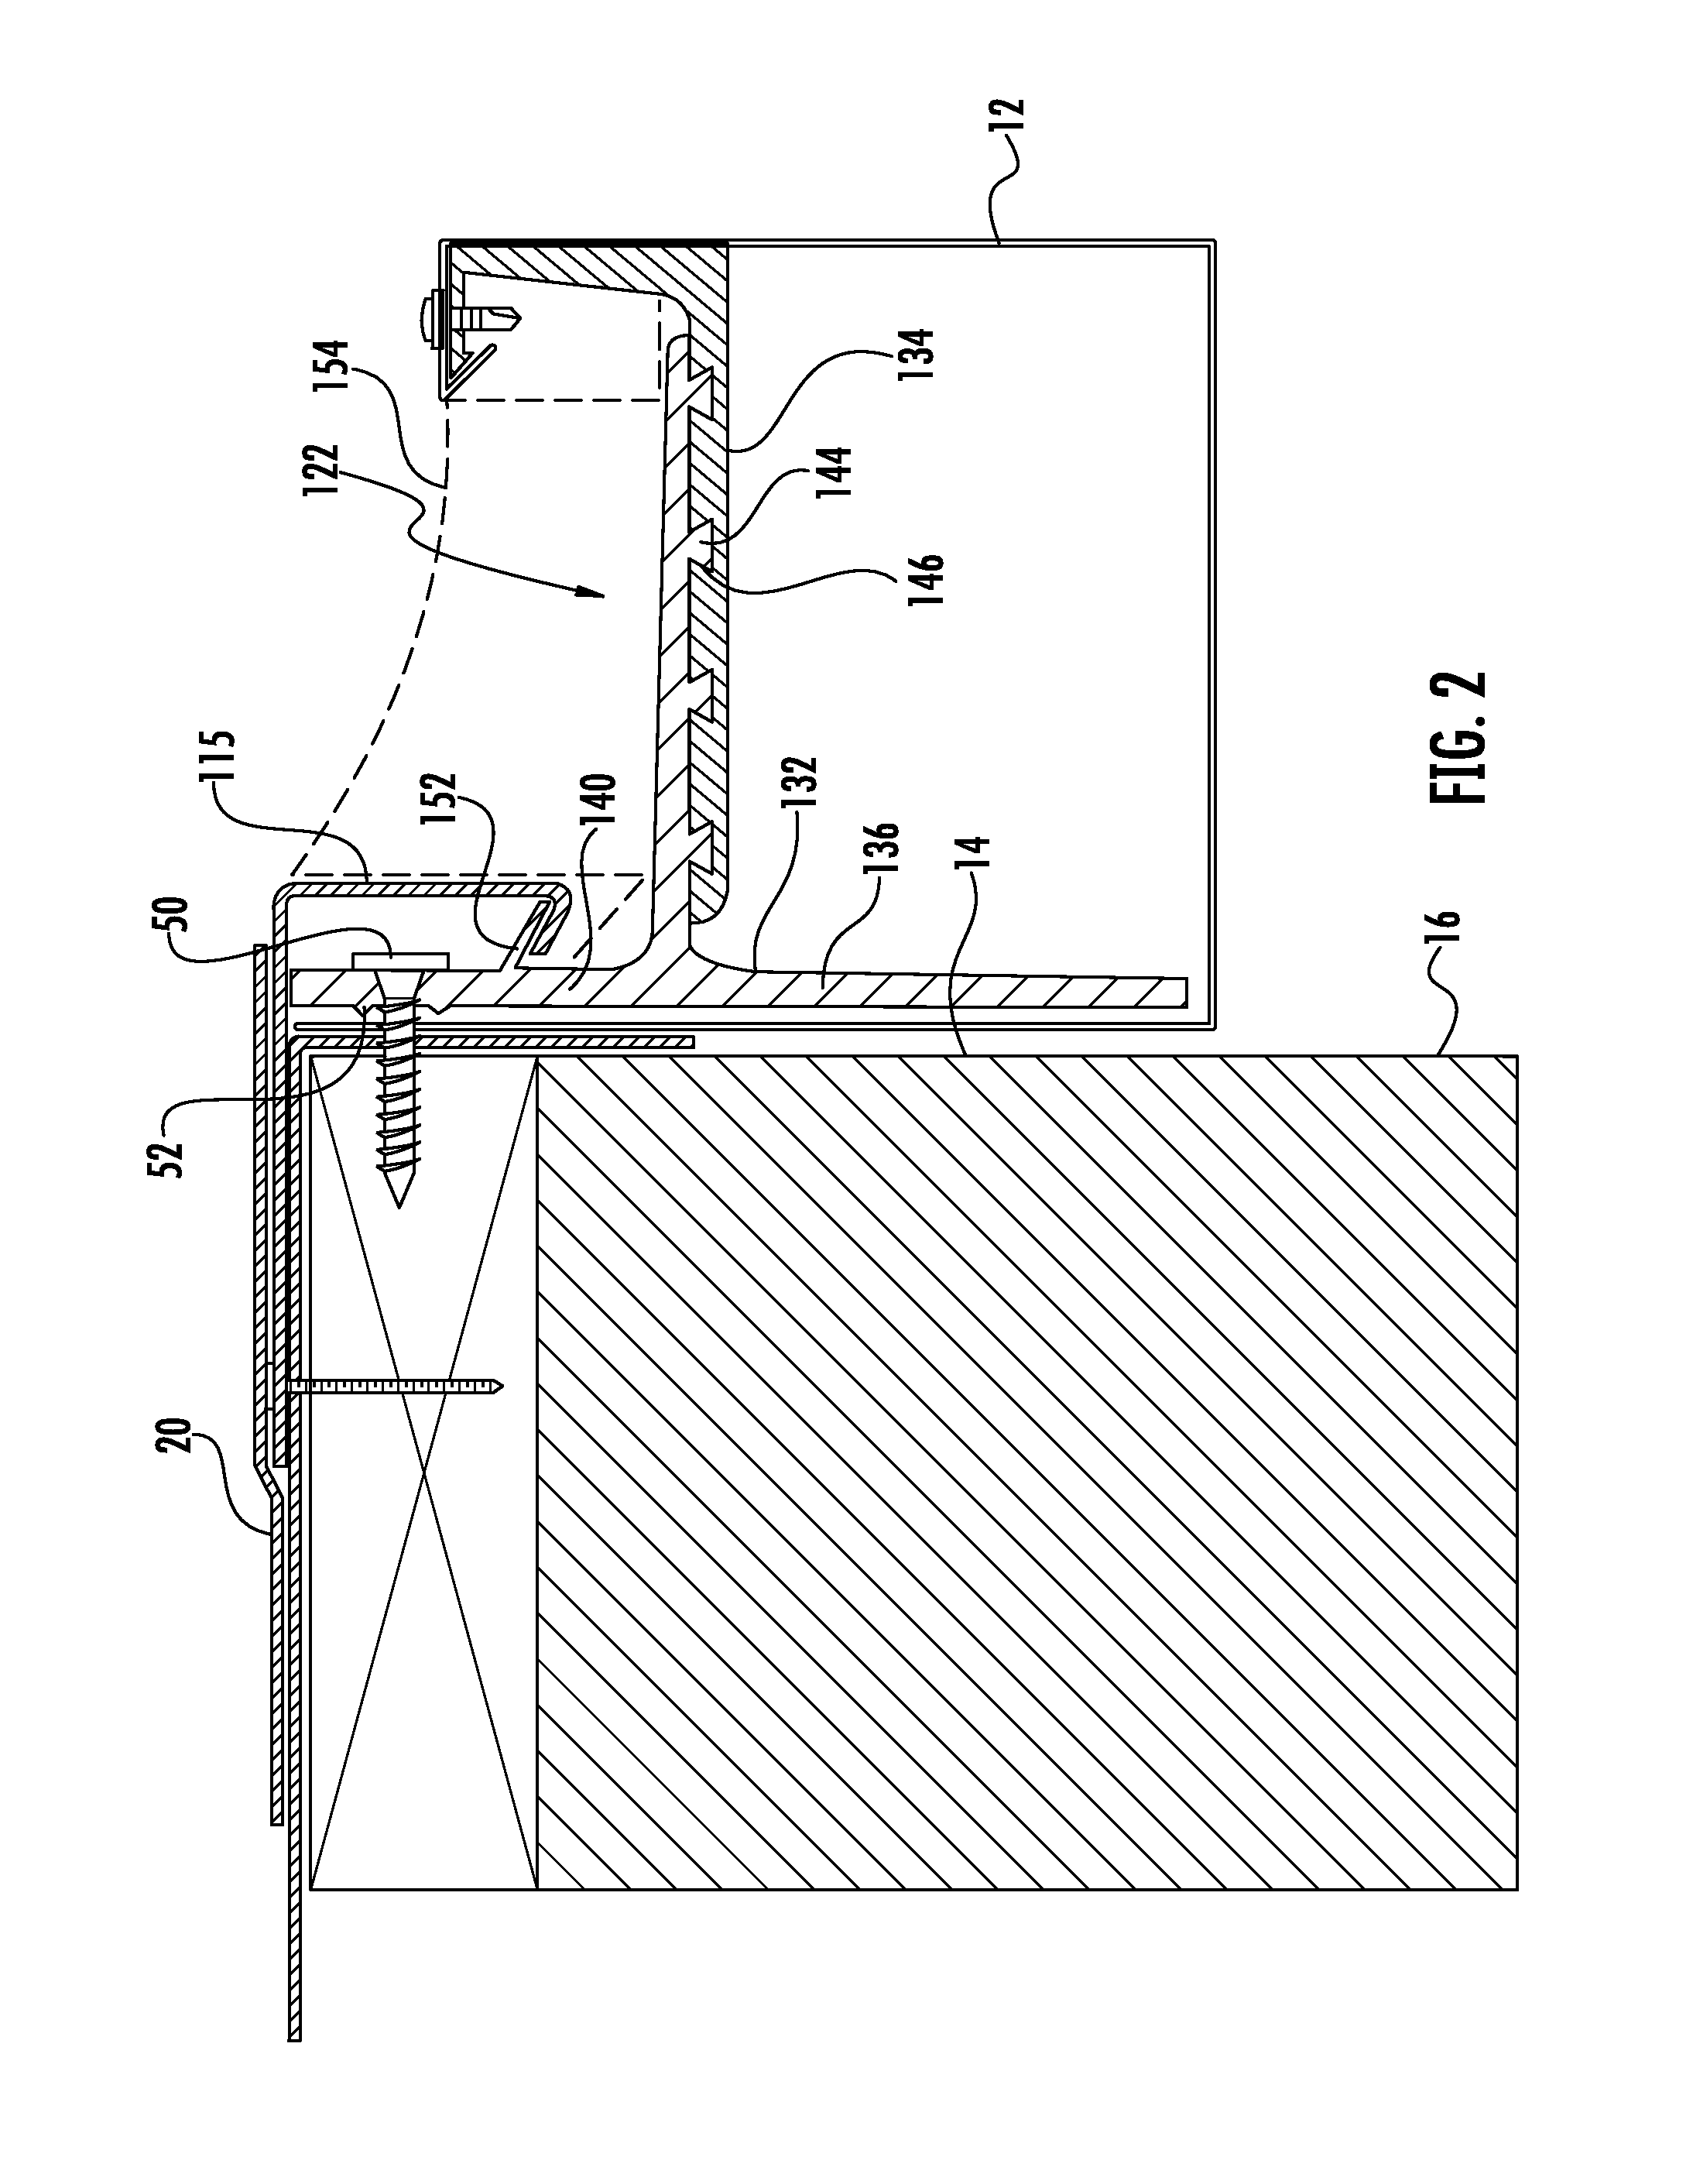 Adjustable bracket device for selectively mounting rain gutters on buildings